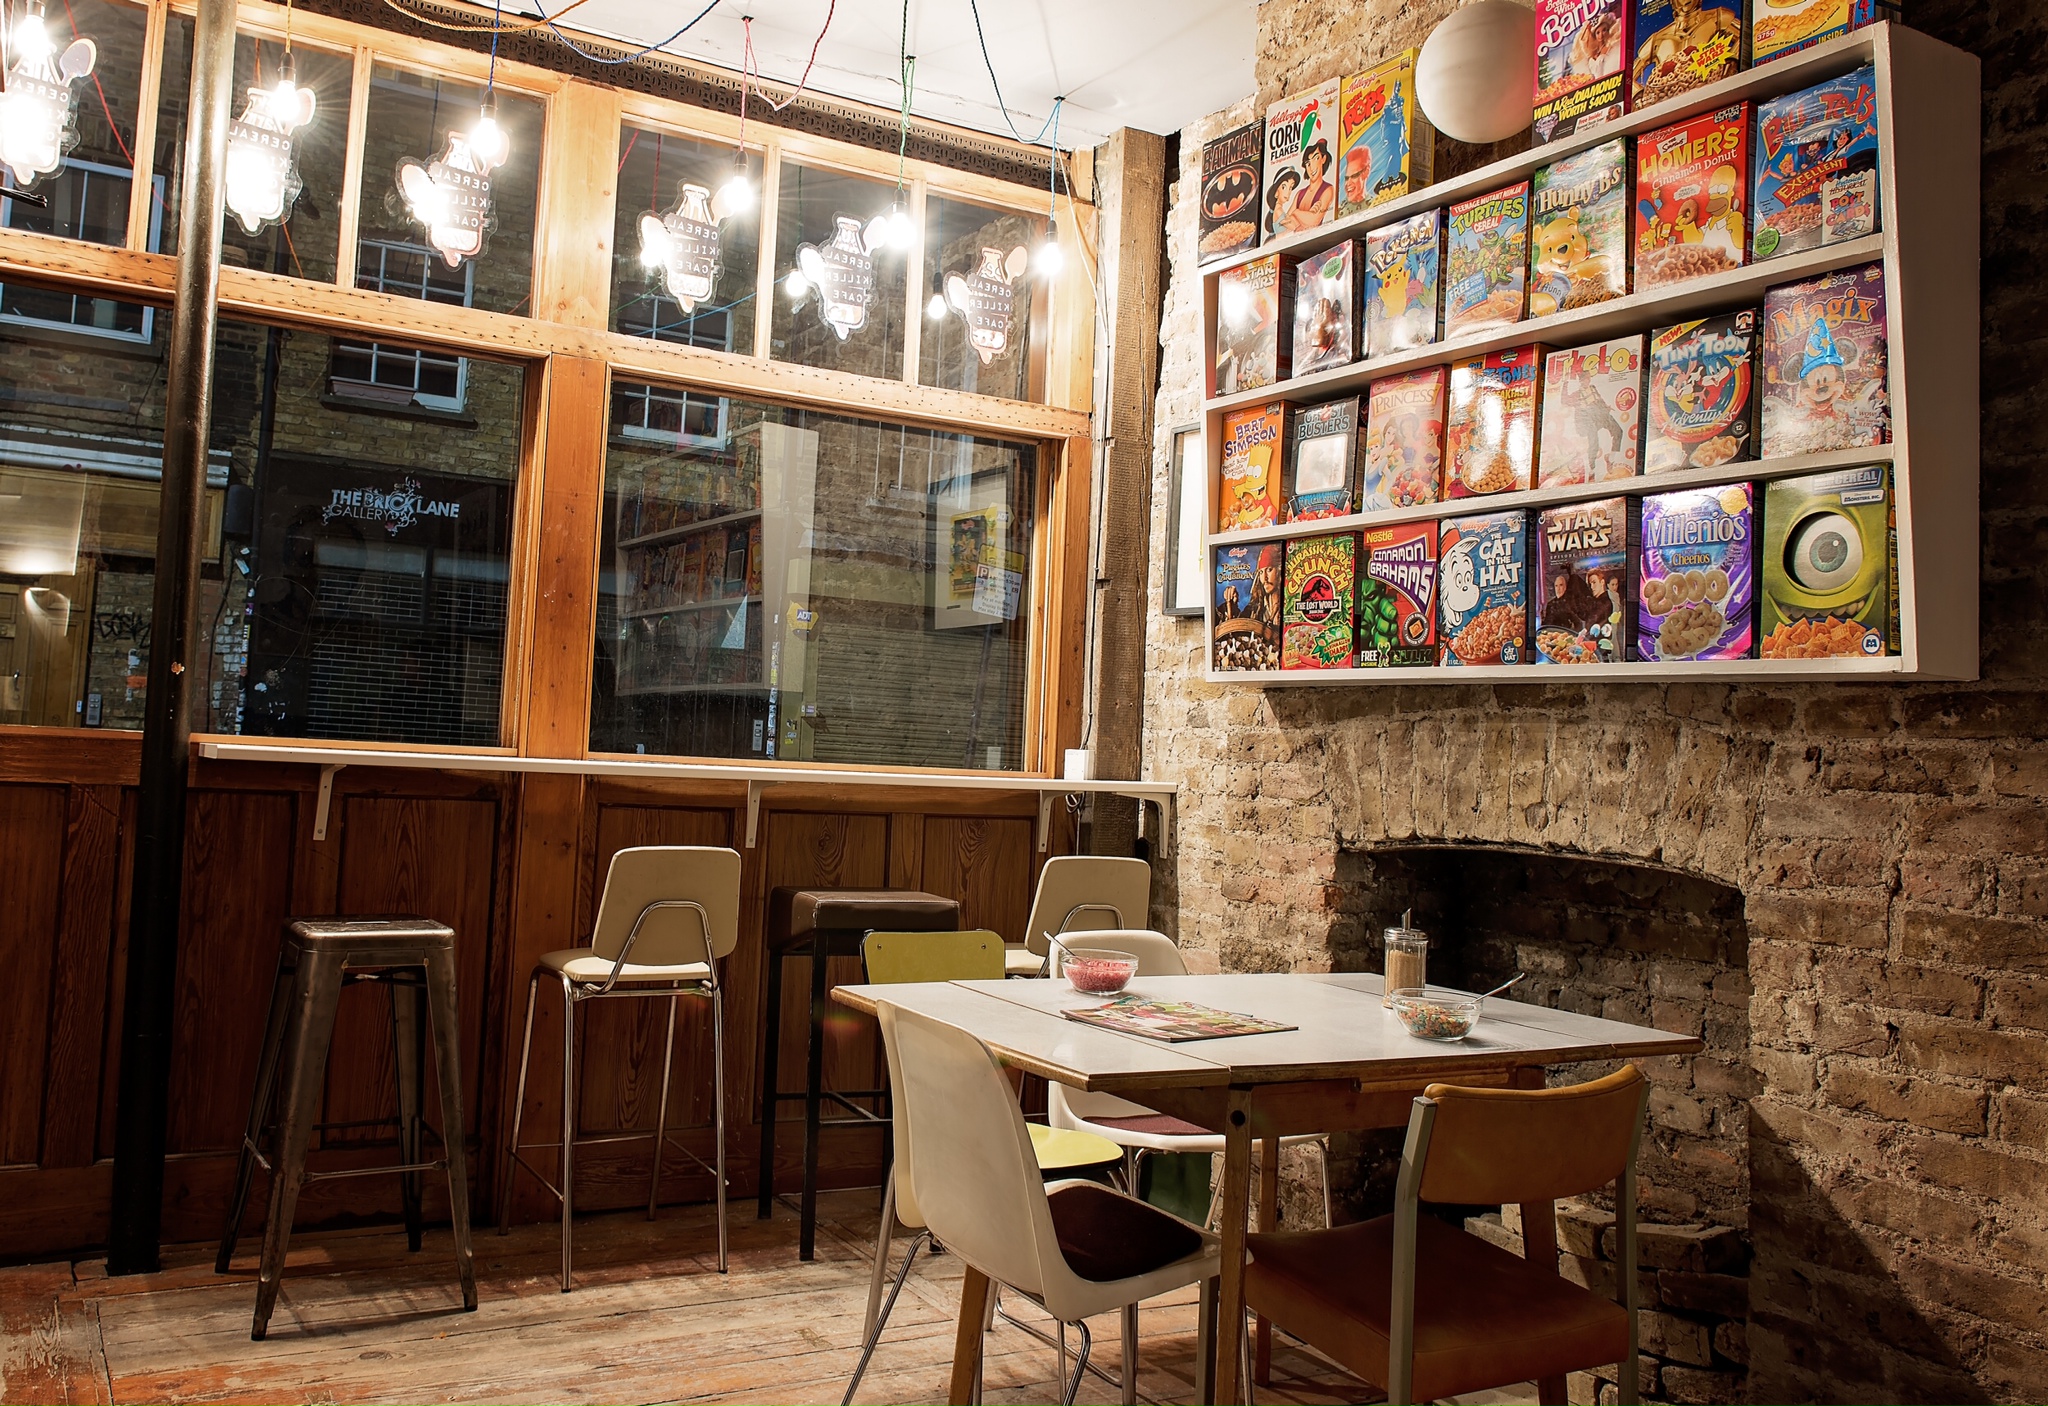 PHOTO: The Cereal Killer Café in London serves 120 different types of cereals from 7:00 a.m. to 8:00 p.m. 